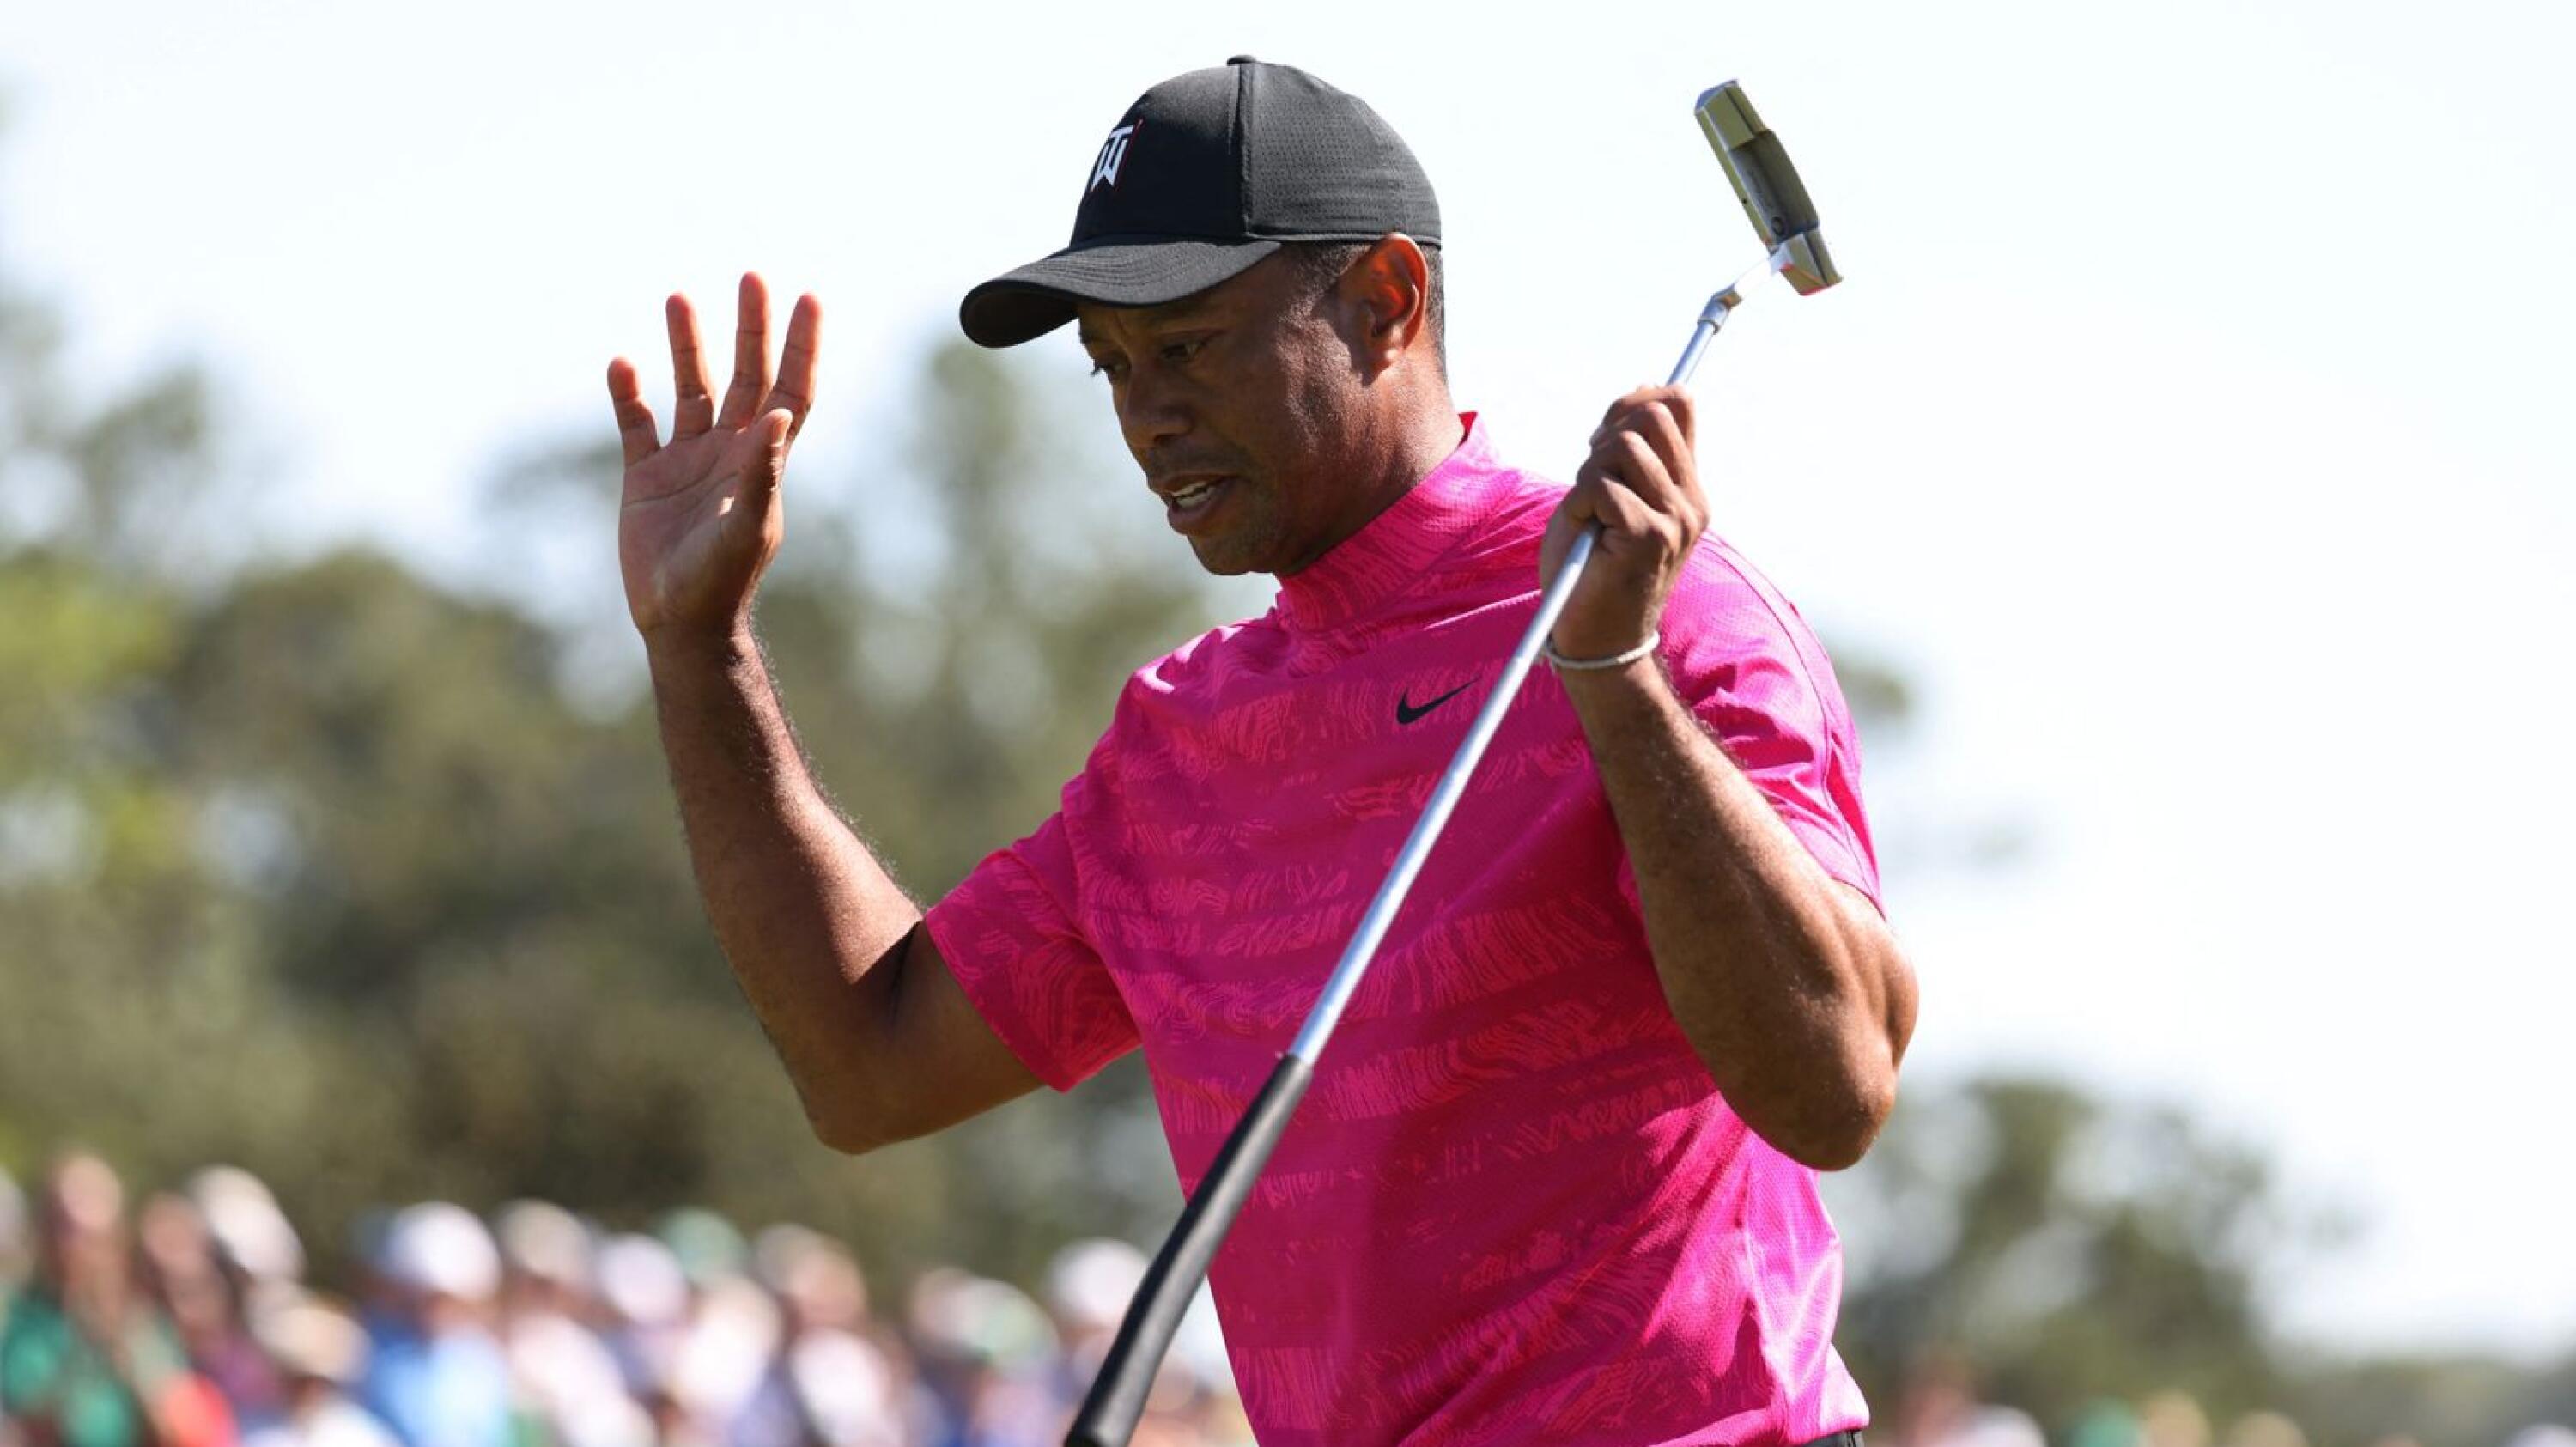 Tiger Woods of the US acknowledges patrons on the 18th green after finishing the first round of the Masters at Augusta National Golf Club in Augusta, Georgia on Thursday